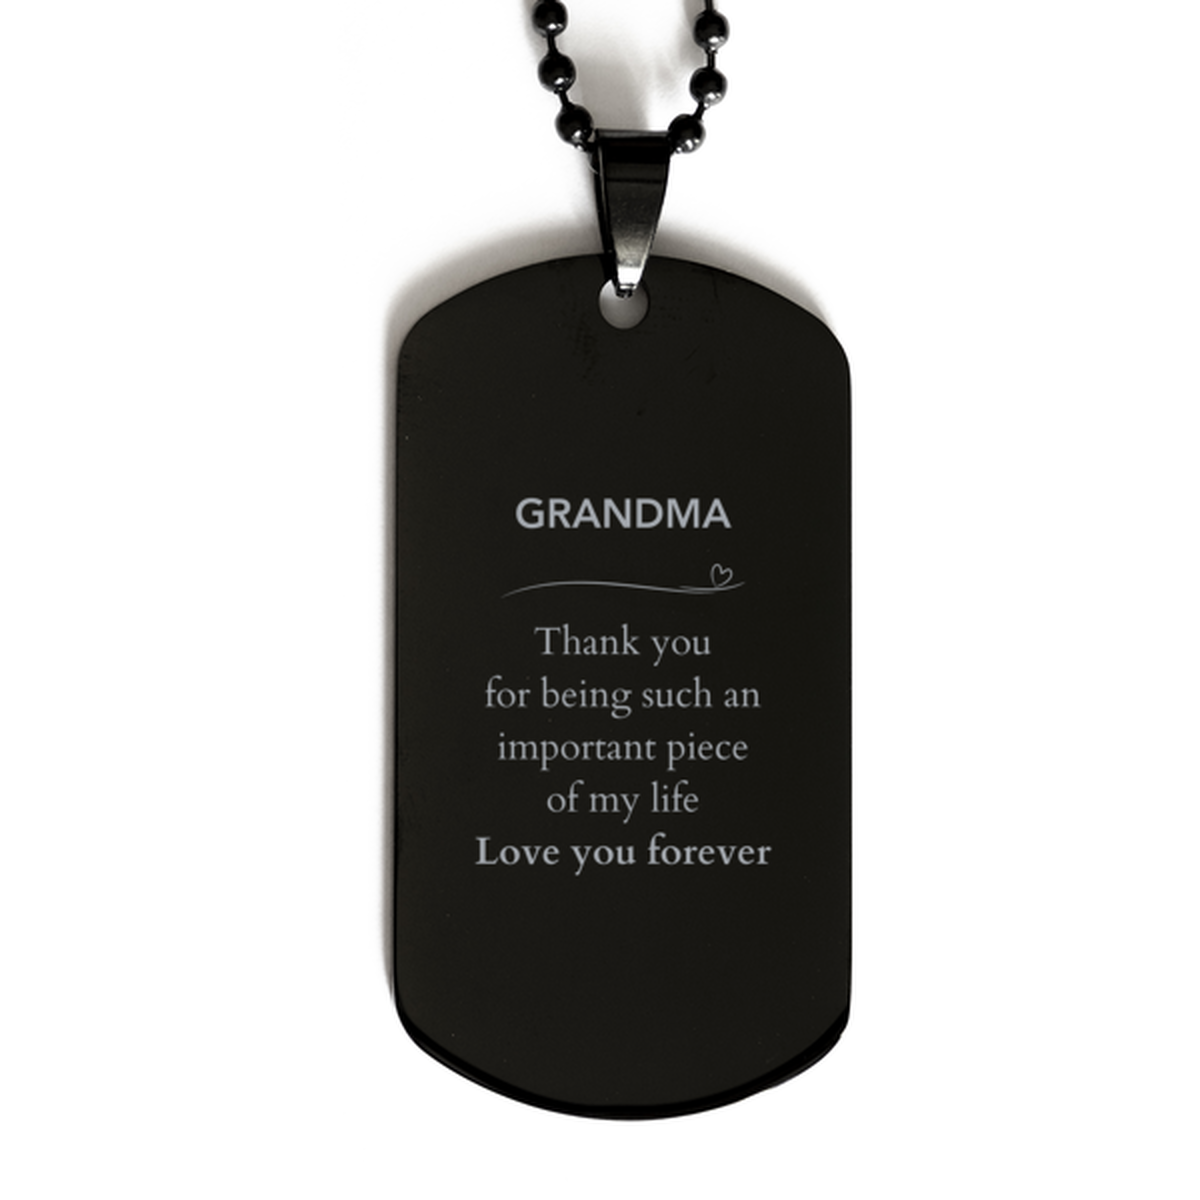 Appropriate Grandma Black Dog Tag Epic Birthday Gifts for Grandma Thank you for being such an important piece of my life Grandma Christmas Mothers Fathers Day